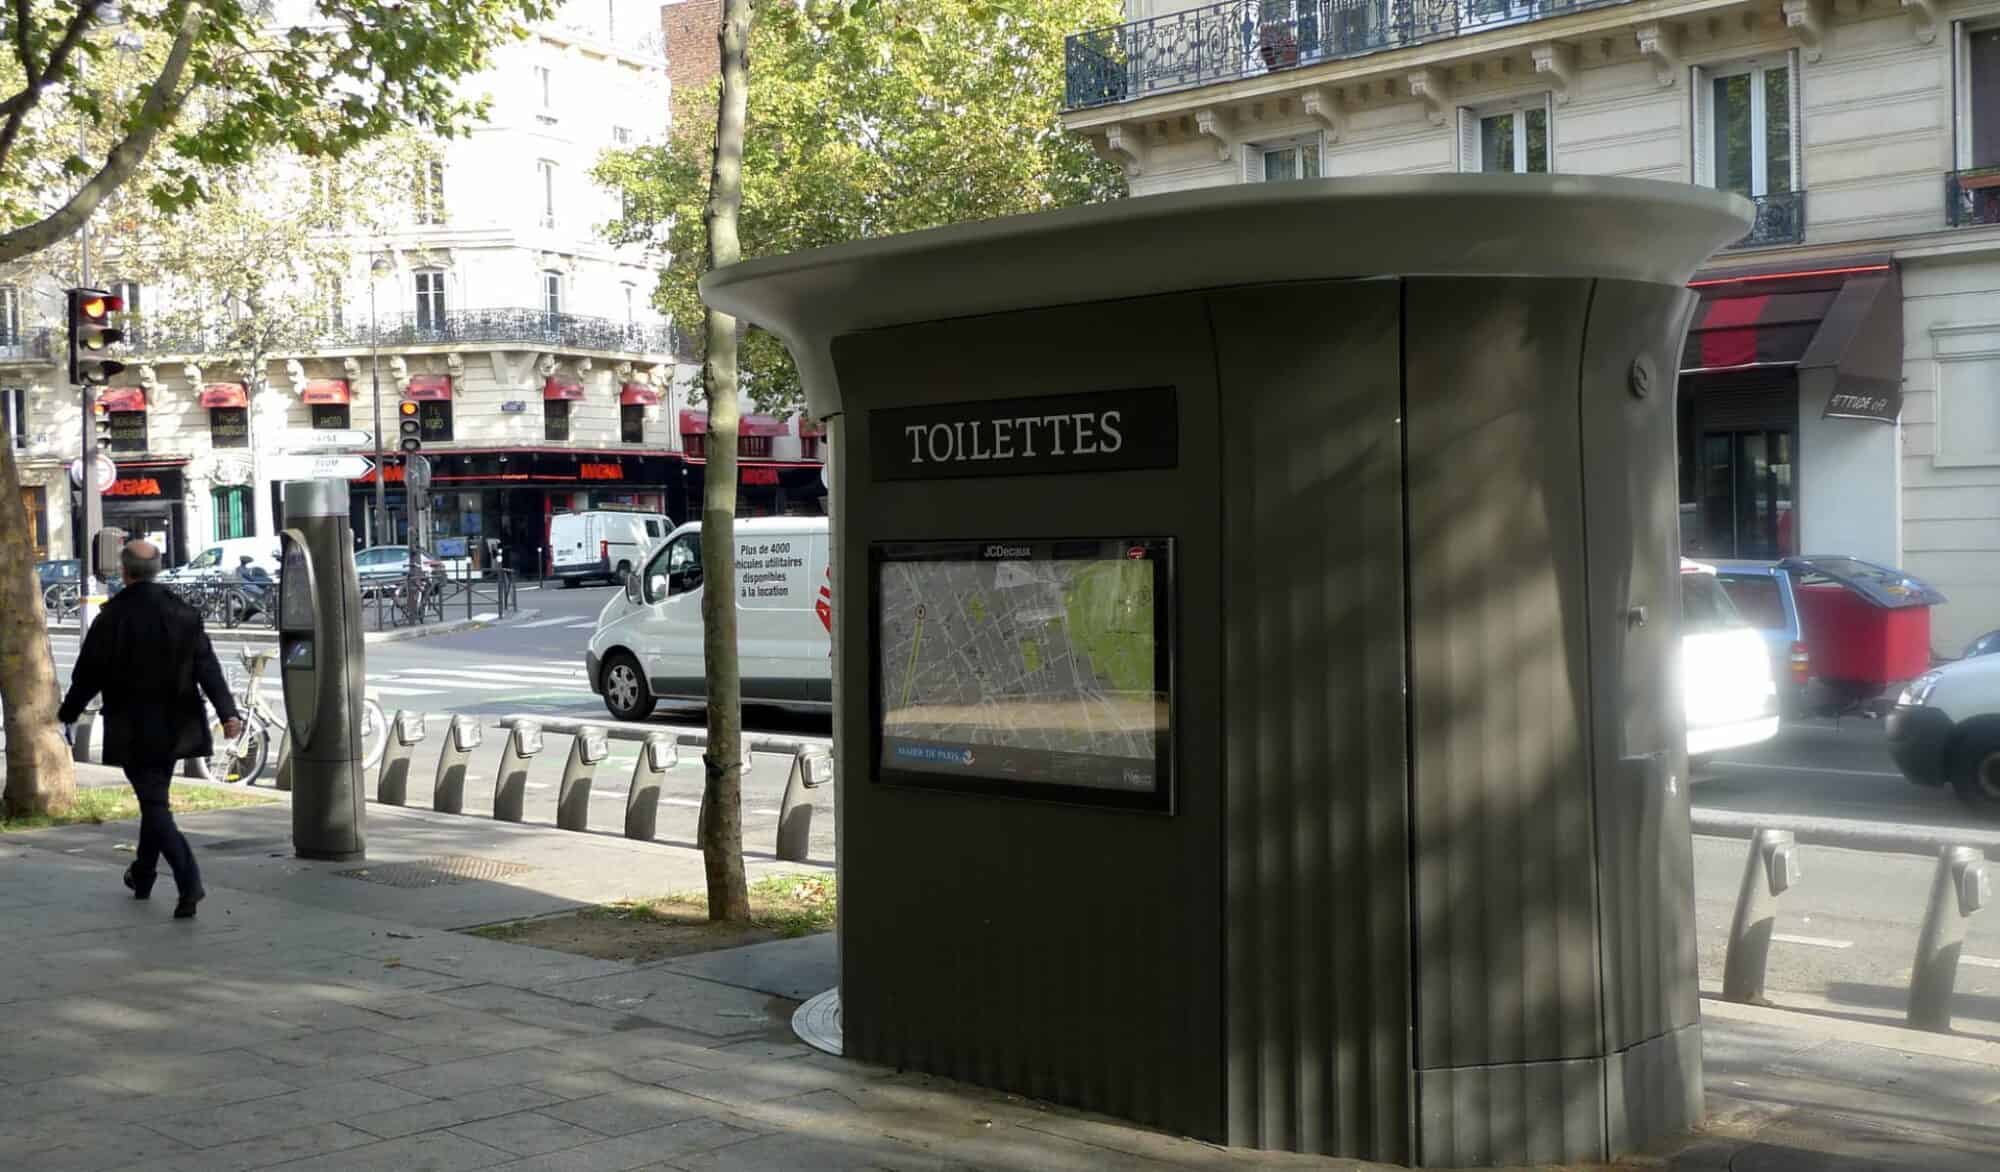 A public toilet photographed from the outside on a Paris street on a sunny day.